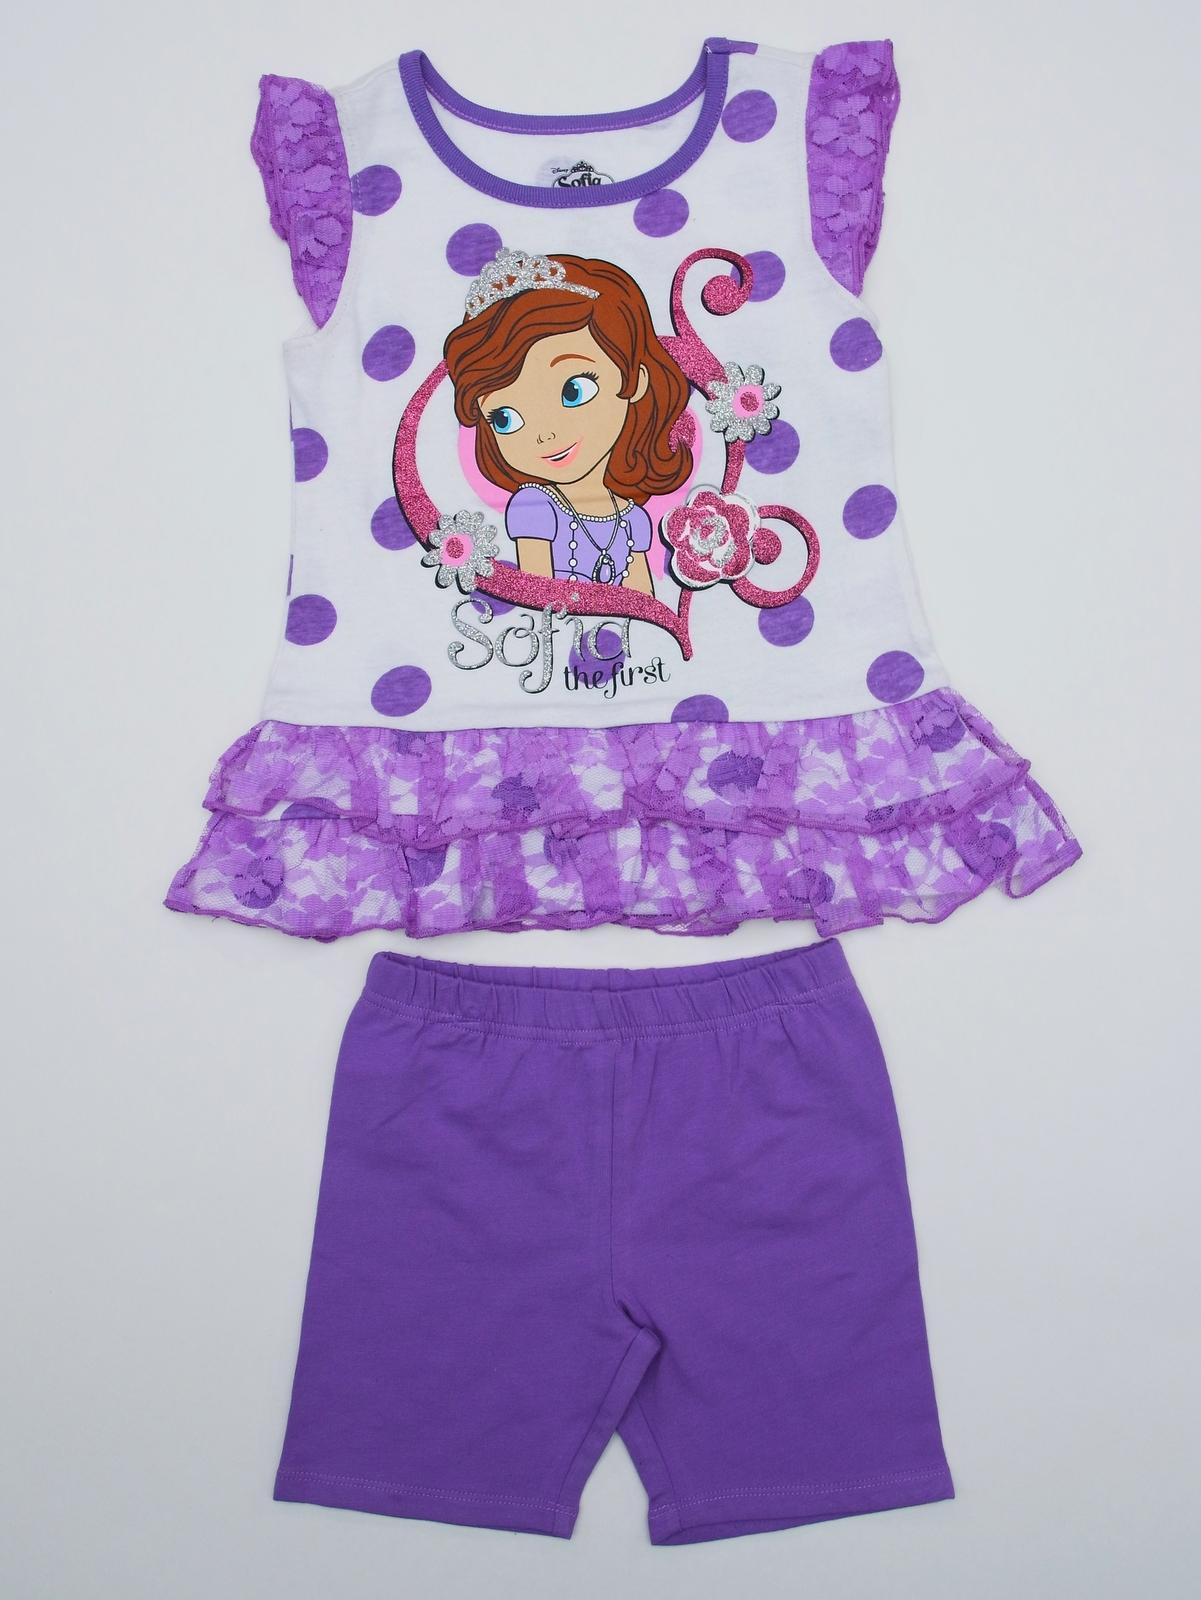 Disney Girl's Tunic Top & Shorts - Sofia The First